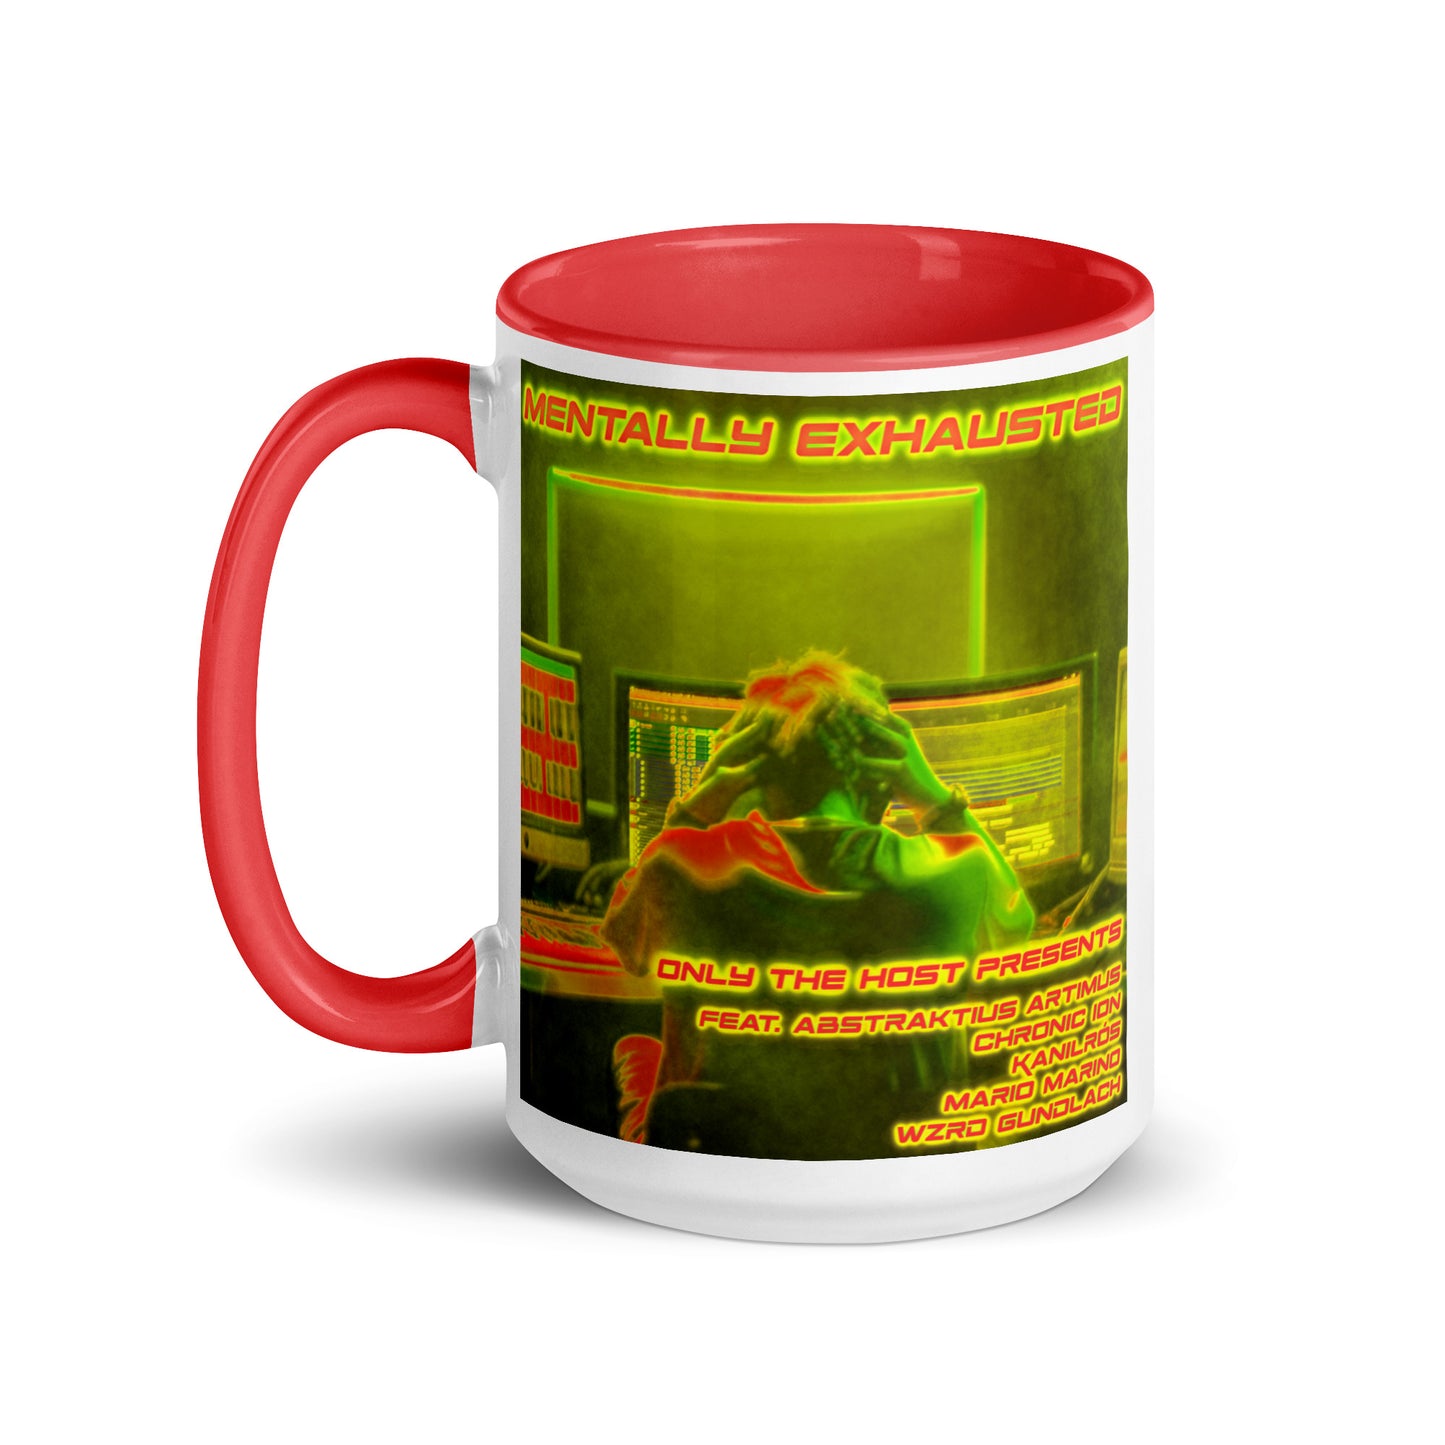 Only The Host Presents - Mentally Exhausted Mug With Color Inside